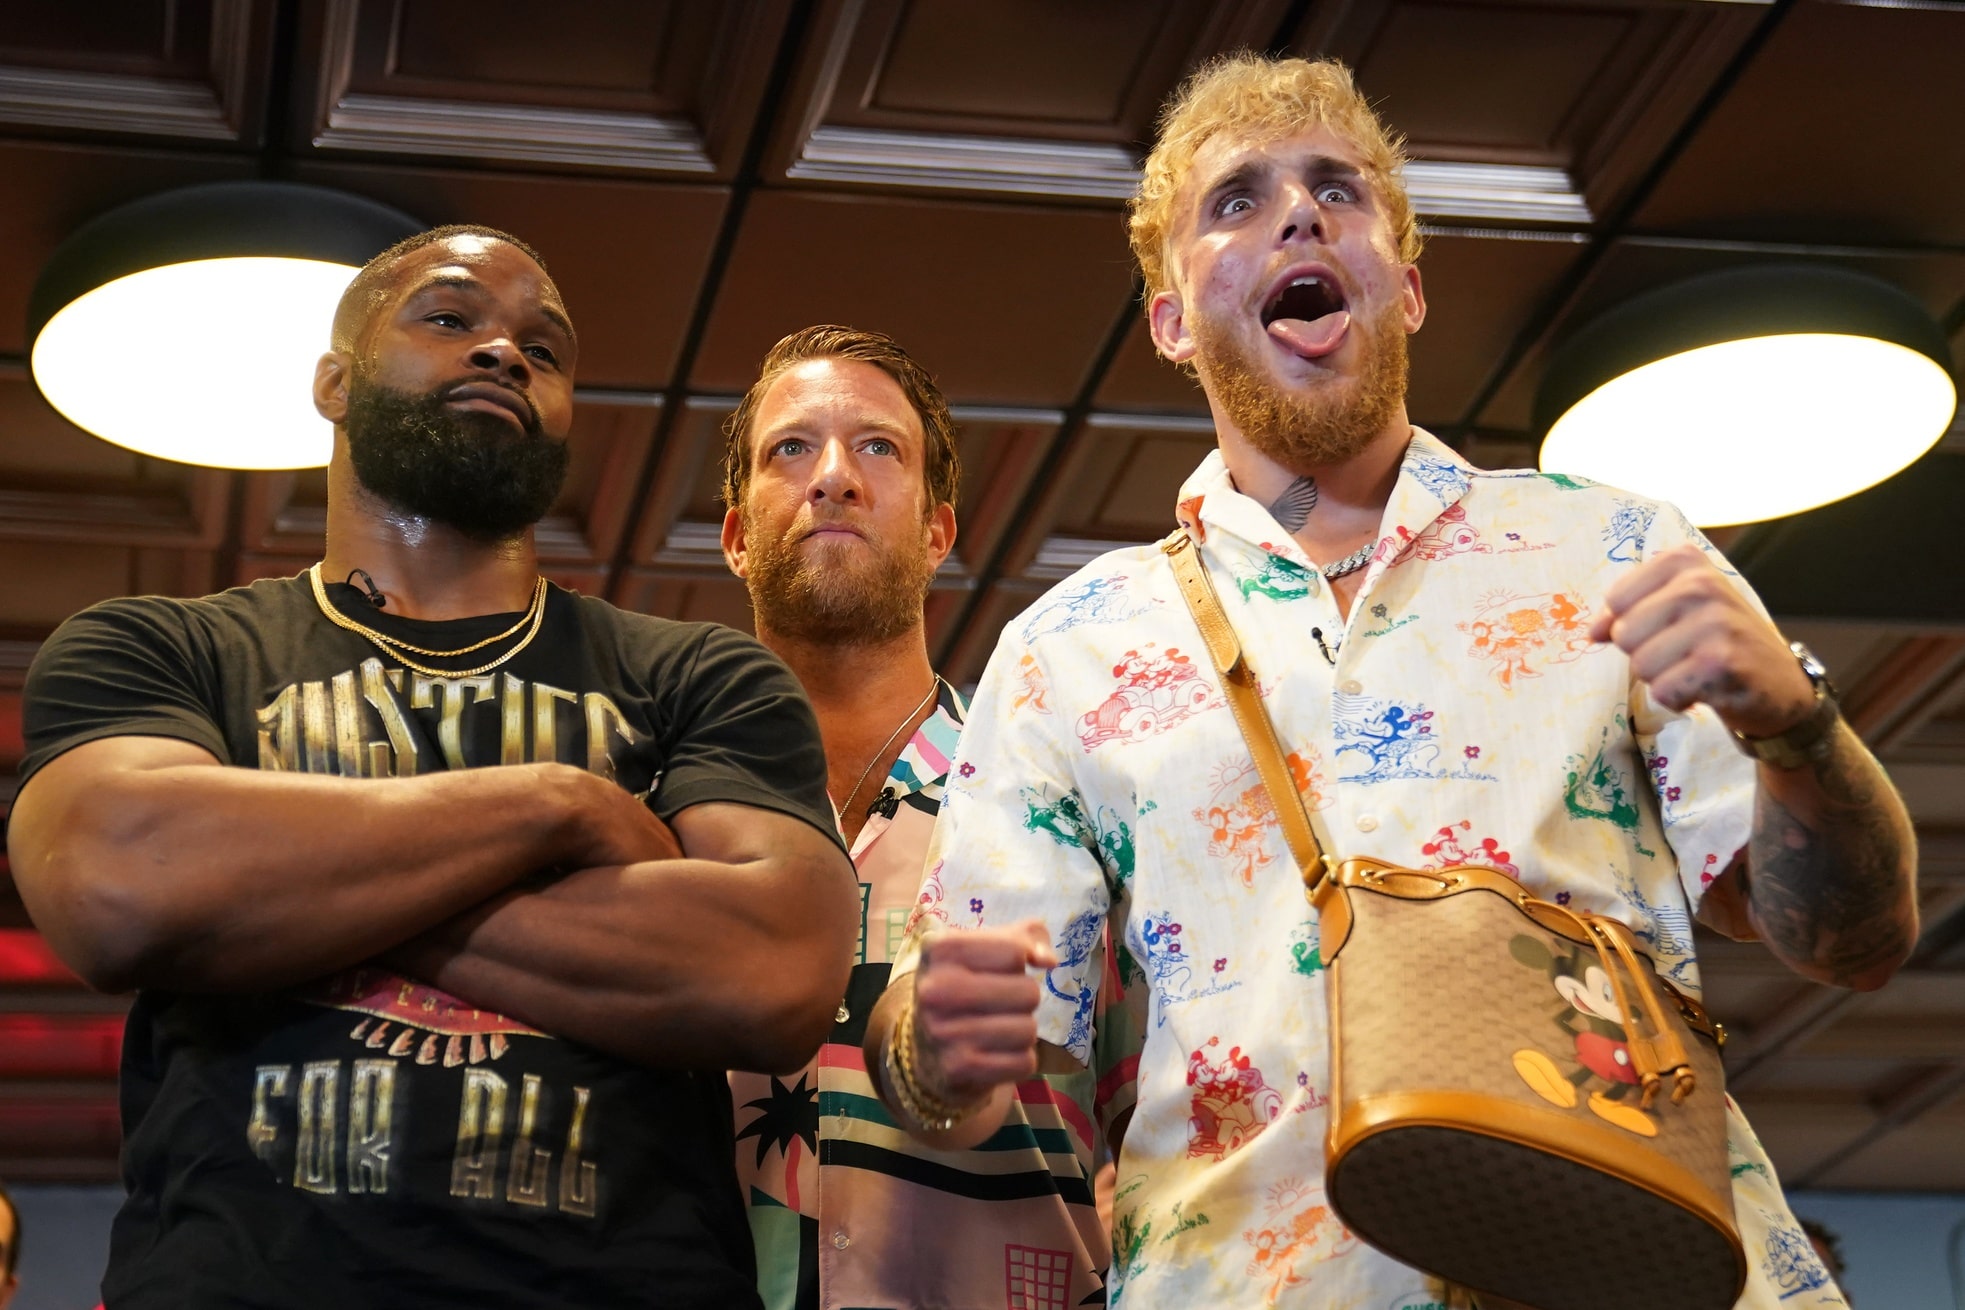 Professional MMA fighter Tyron Woodley and YouTube star Jake Paul face off in front of Barstool Sports founder Dave Portnoy at World Famous 5th St. Gym.